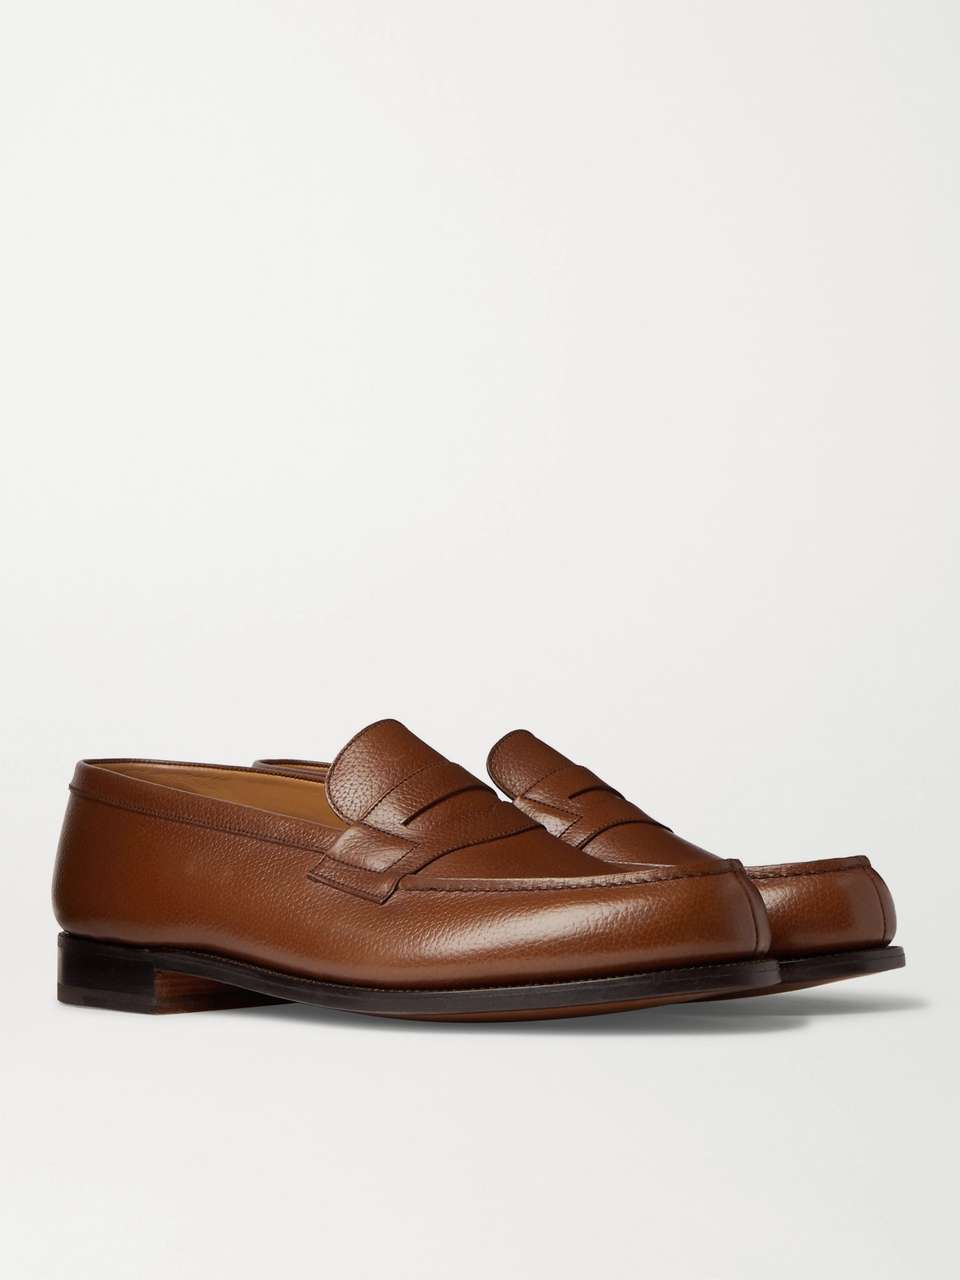 Brown 180 Moccasin Full-Grain Leather Loafers | J.M. WESTON | MR PORTER